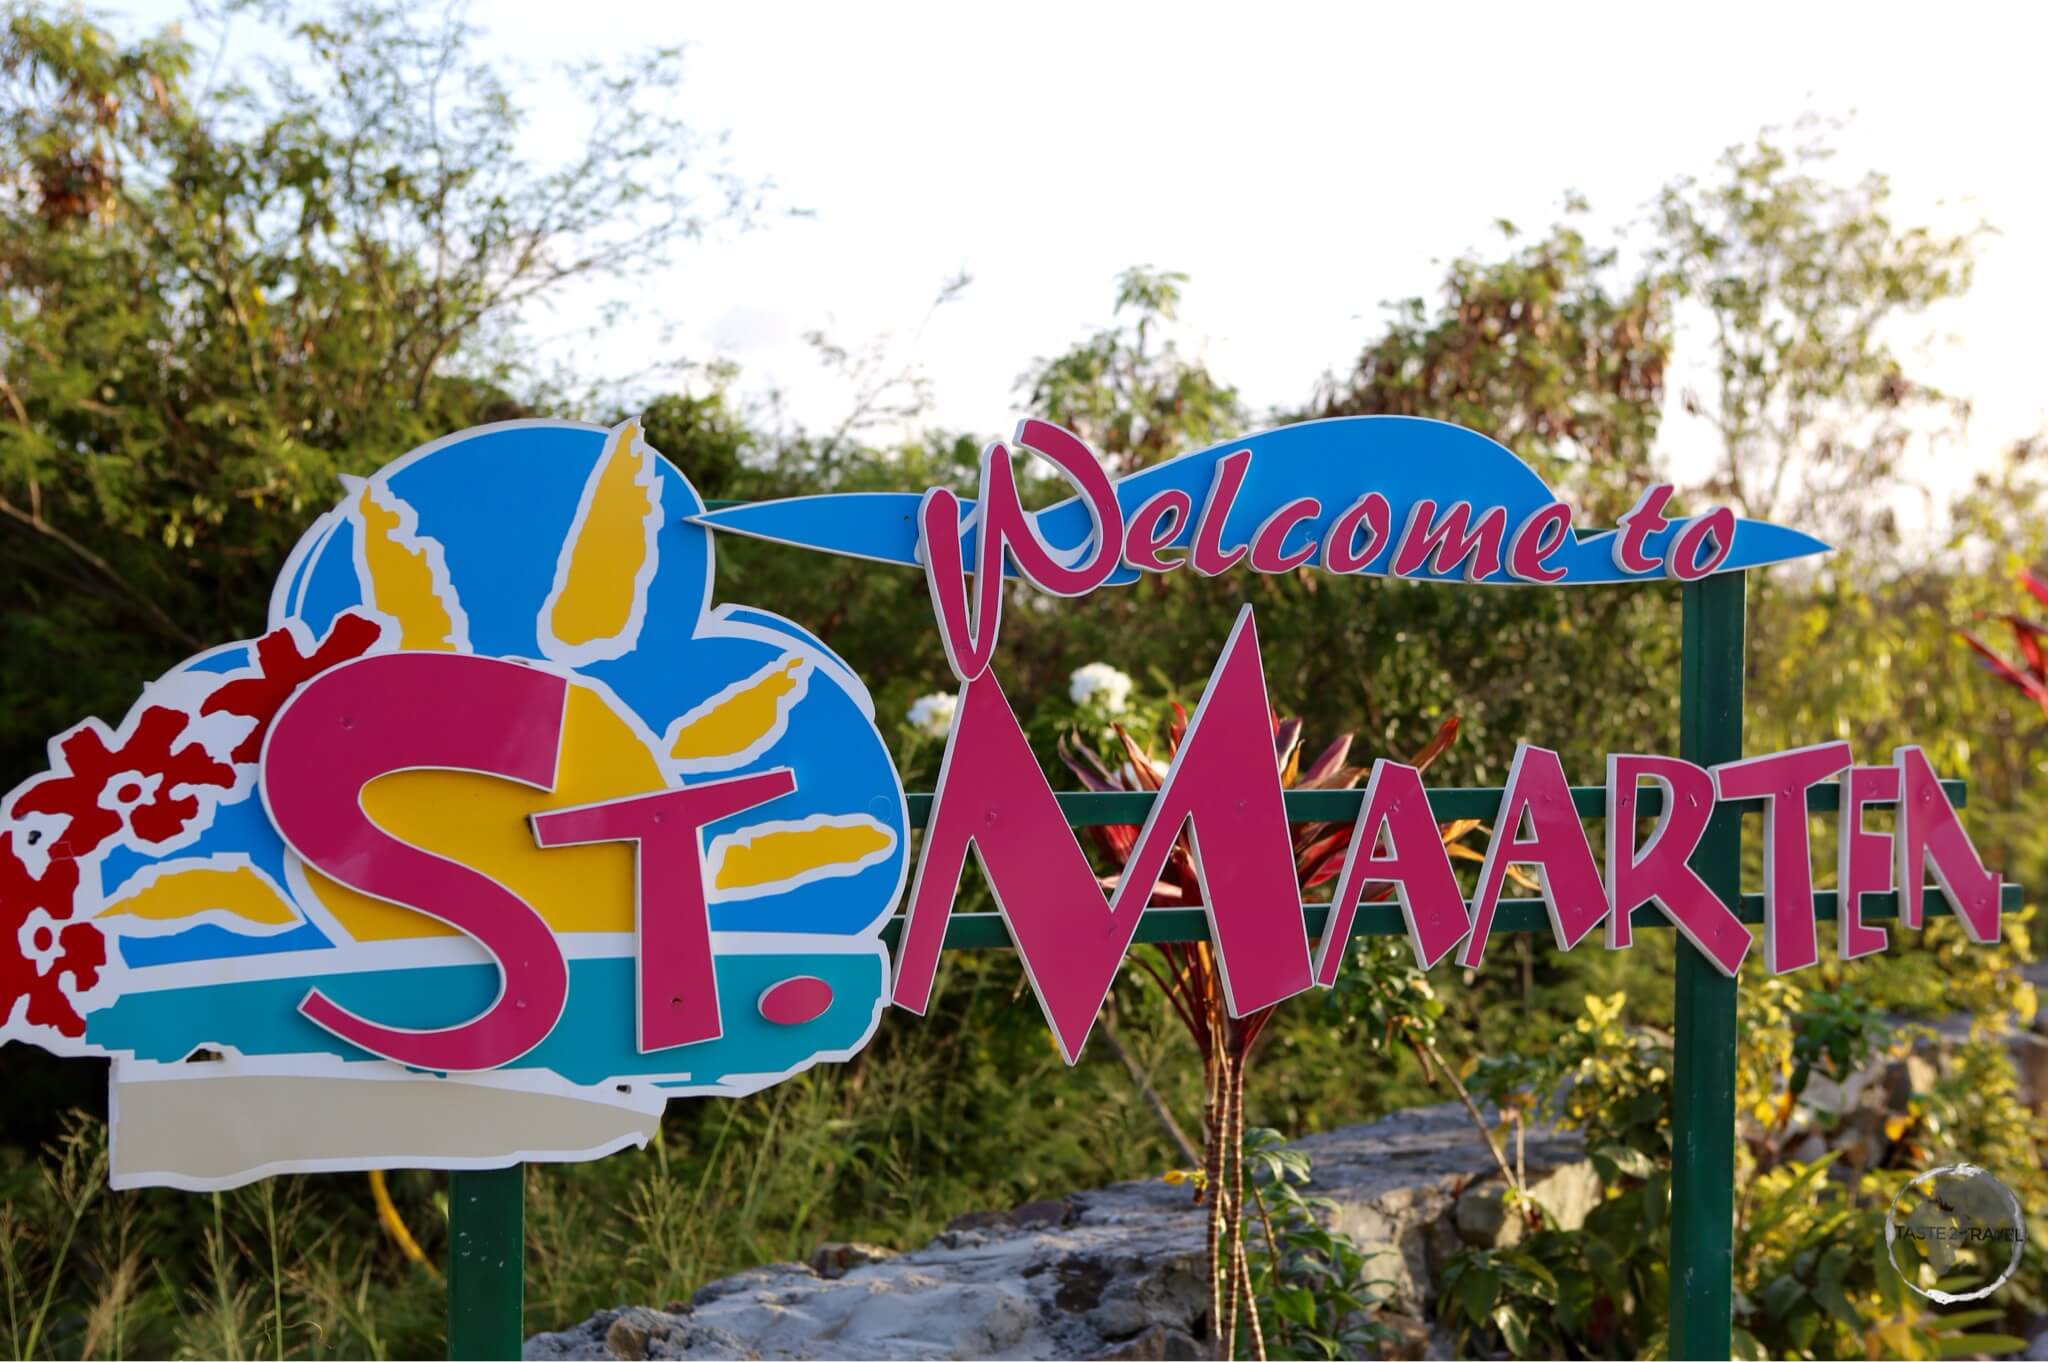 A colourful and funky 'Welcome' sign on the Dutch side of the island.